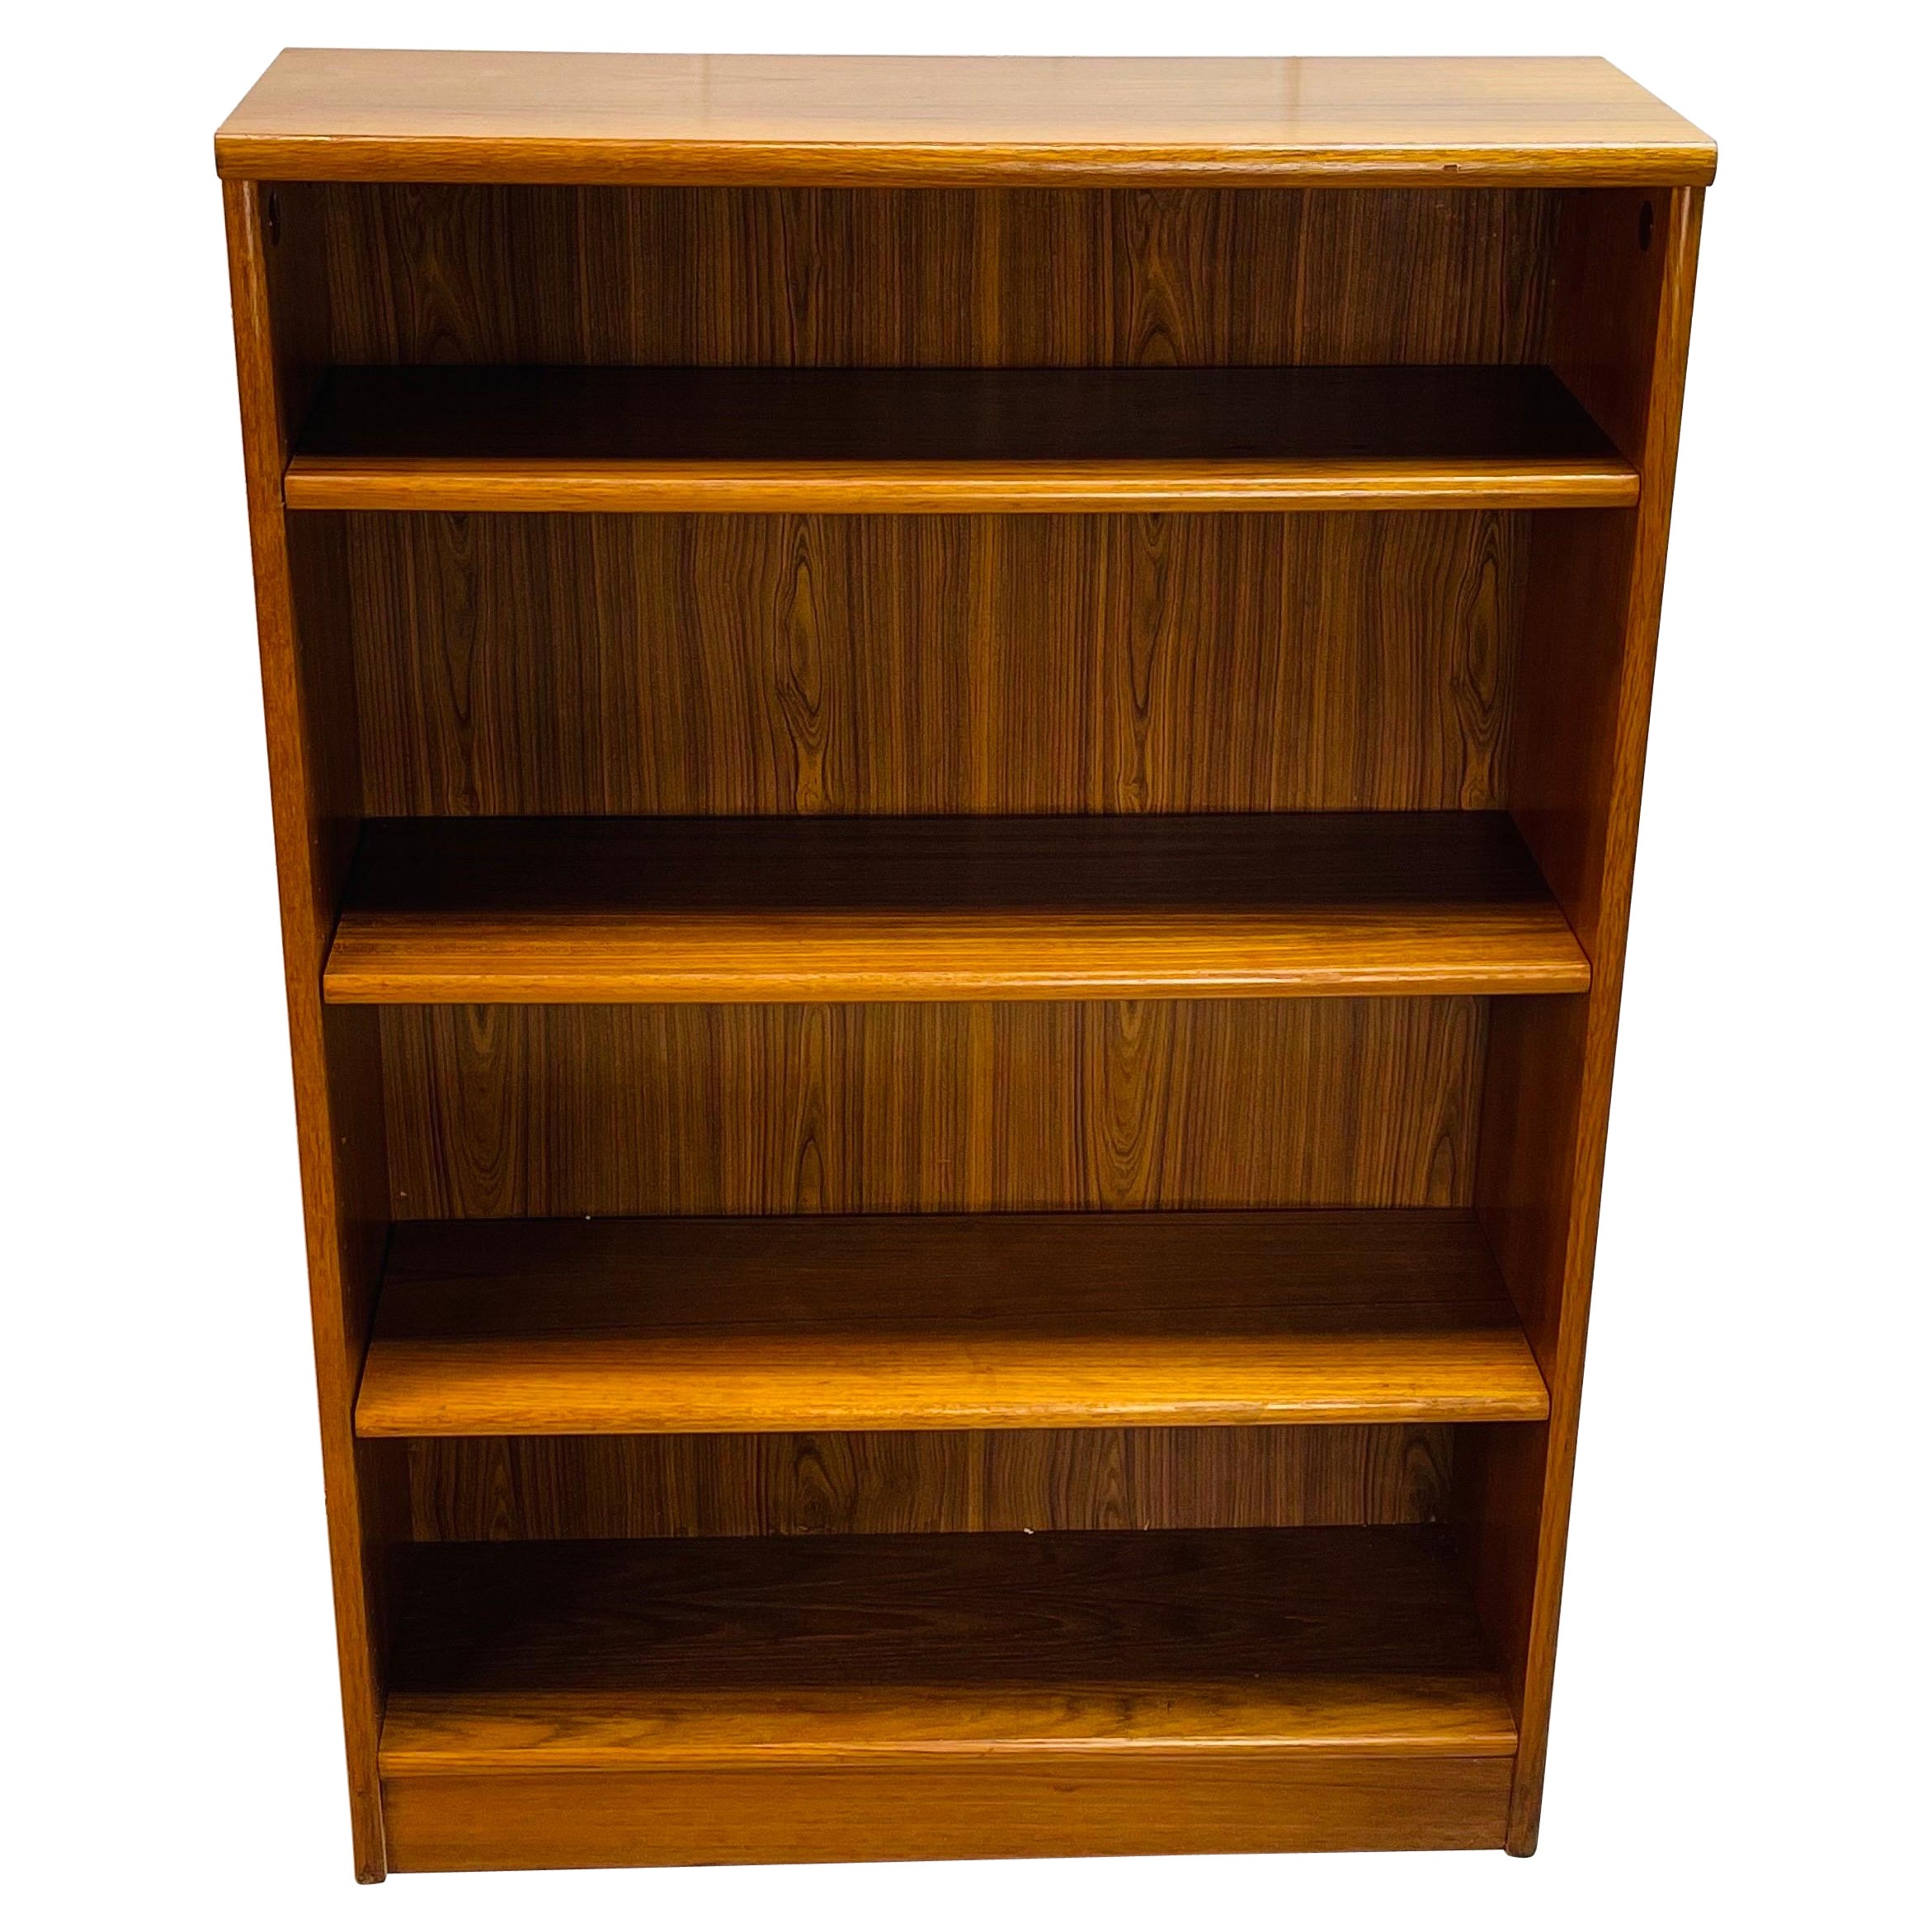 1970s Teak Wood Bookcase For Sale